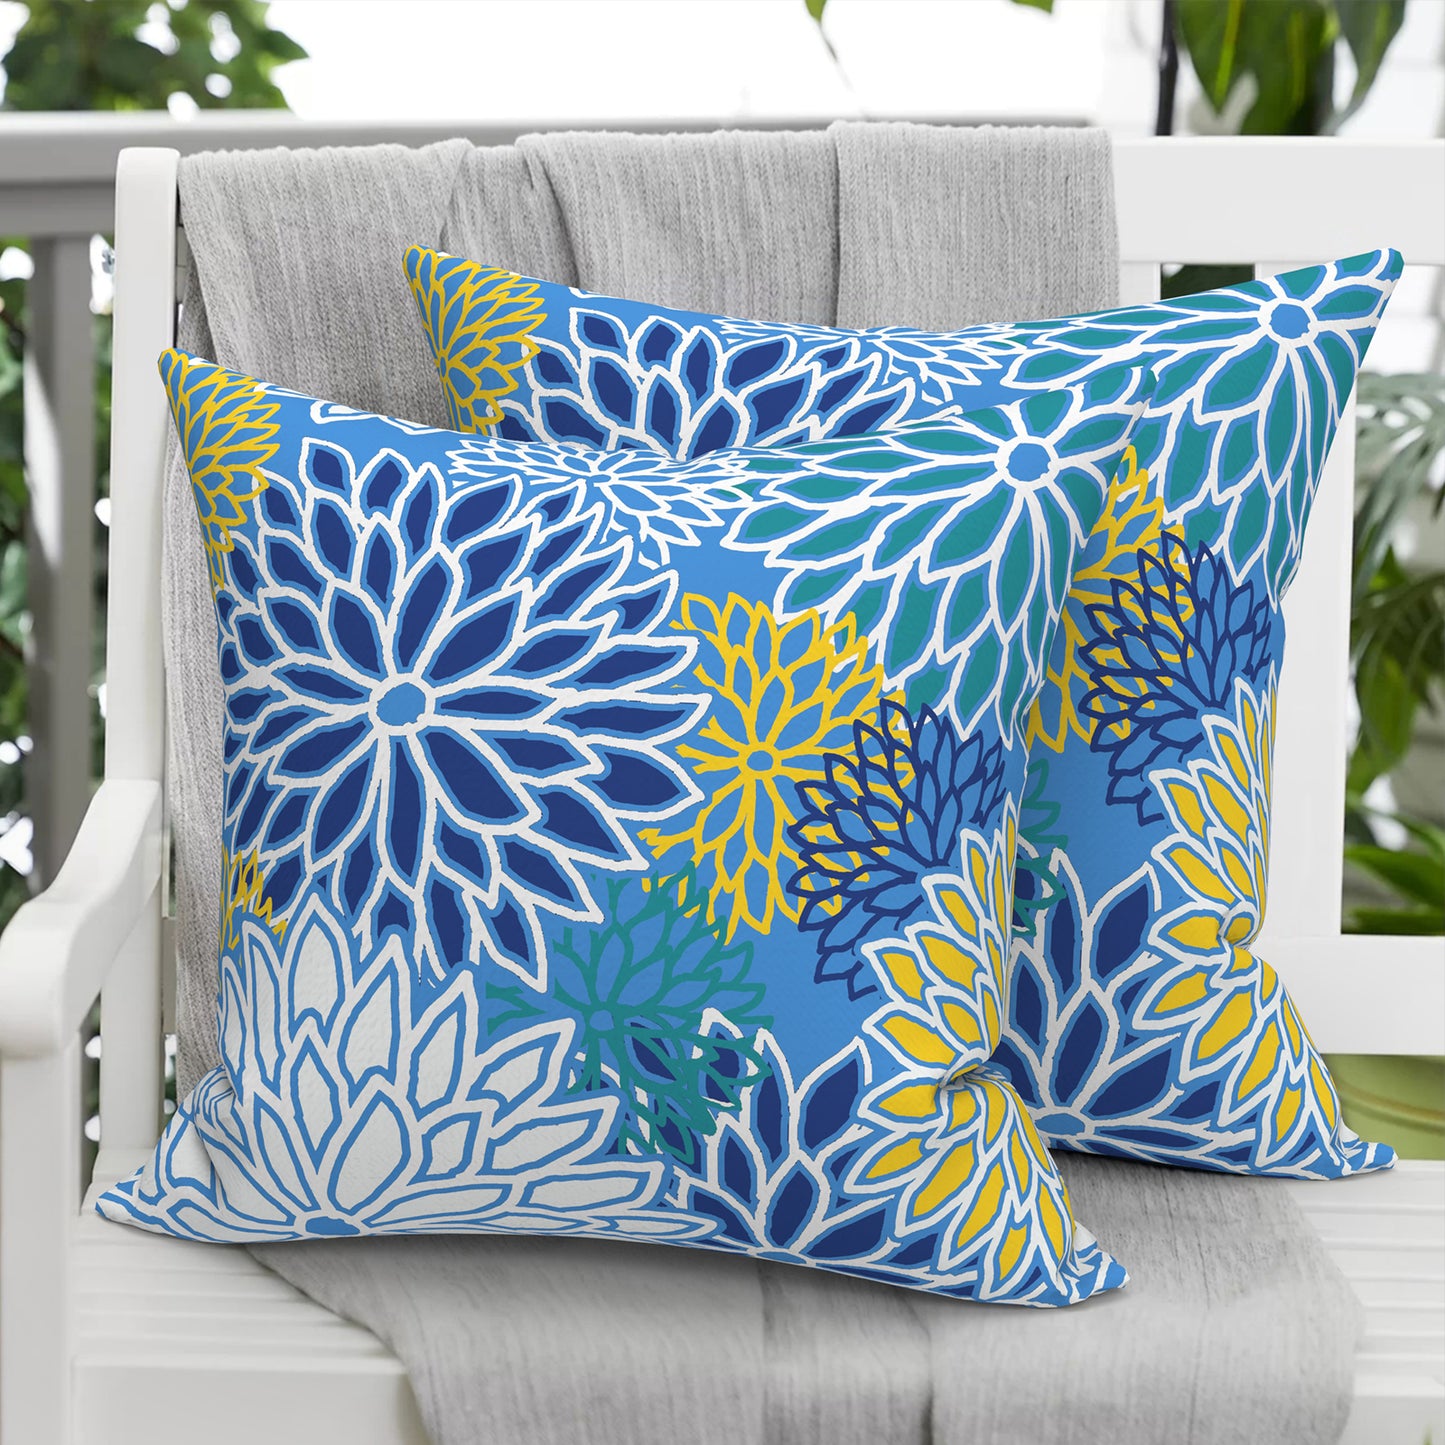 Melody Elephant Pack of 2 Patio Throw Pillow Covers ONLY, Water Repellent Cushion Cases 20x20 Inch, Square Pillowcases for Outdoor Couch Decoration, Dahlia Blue